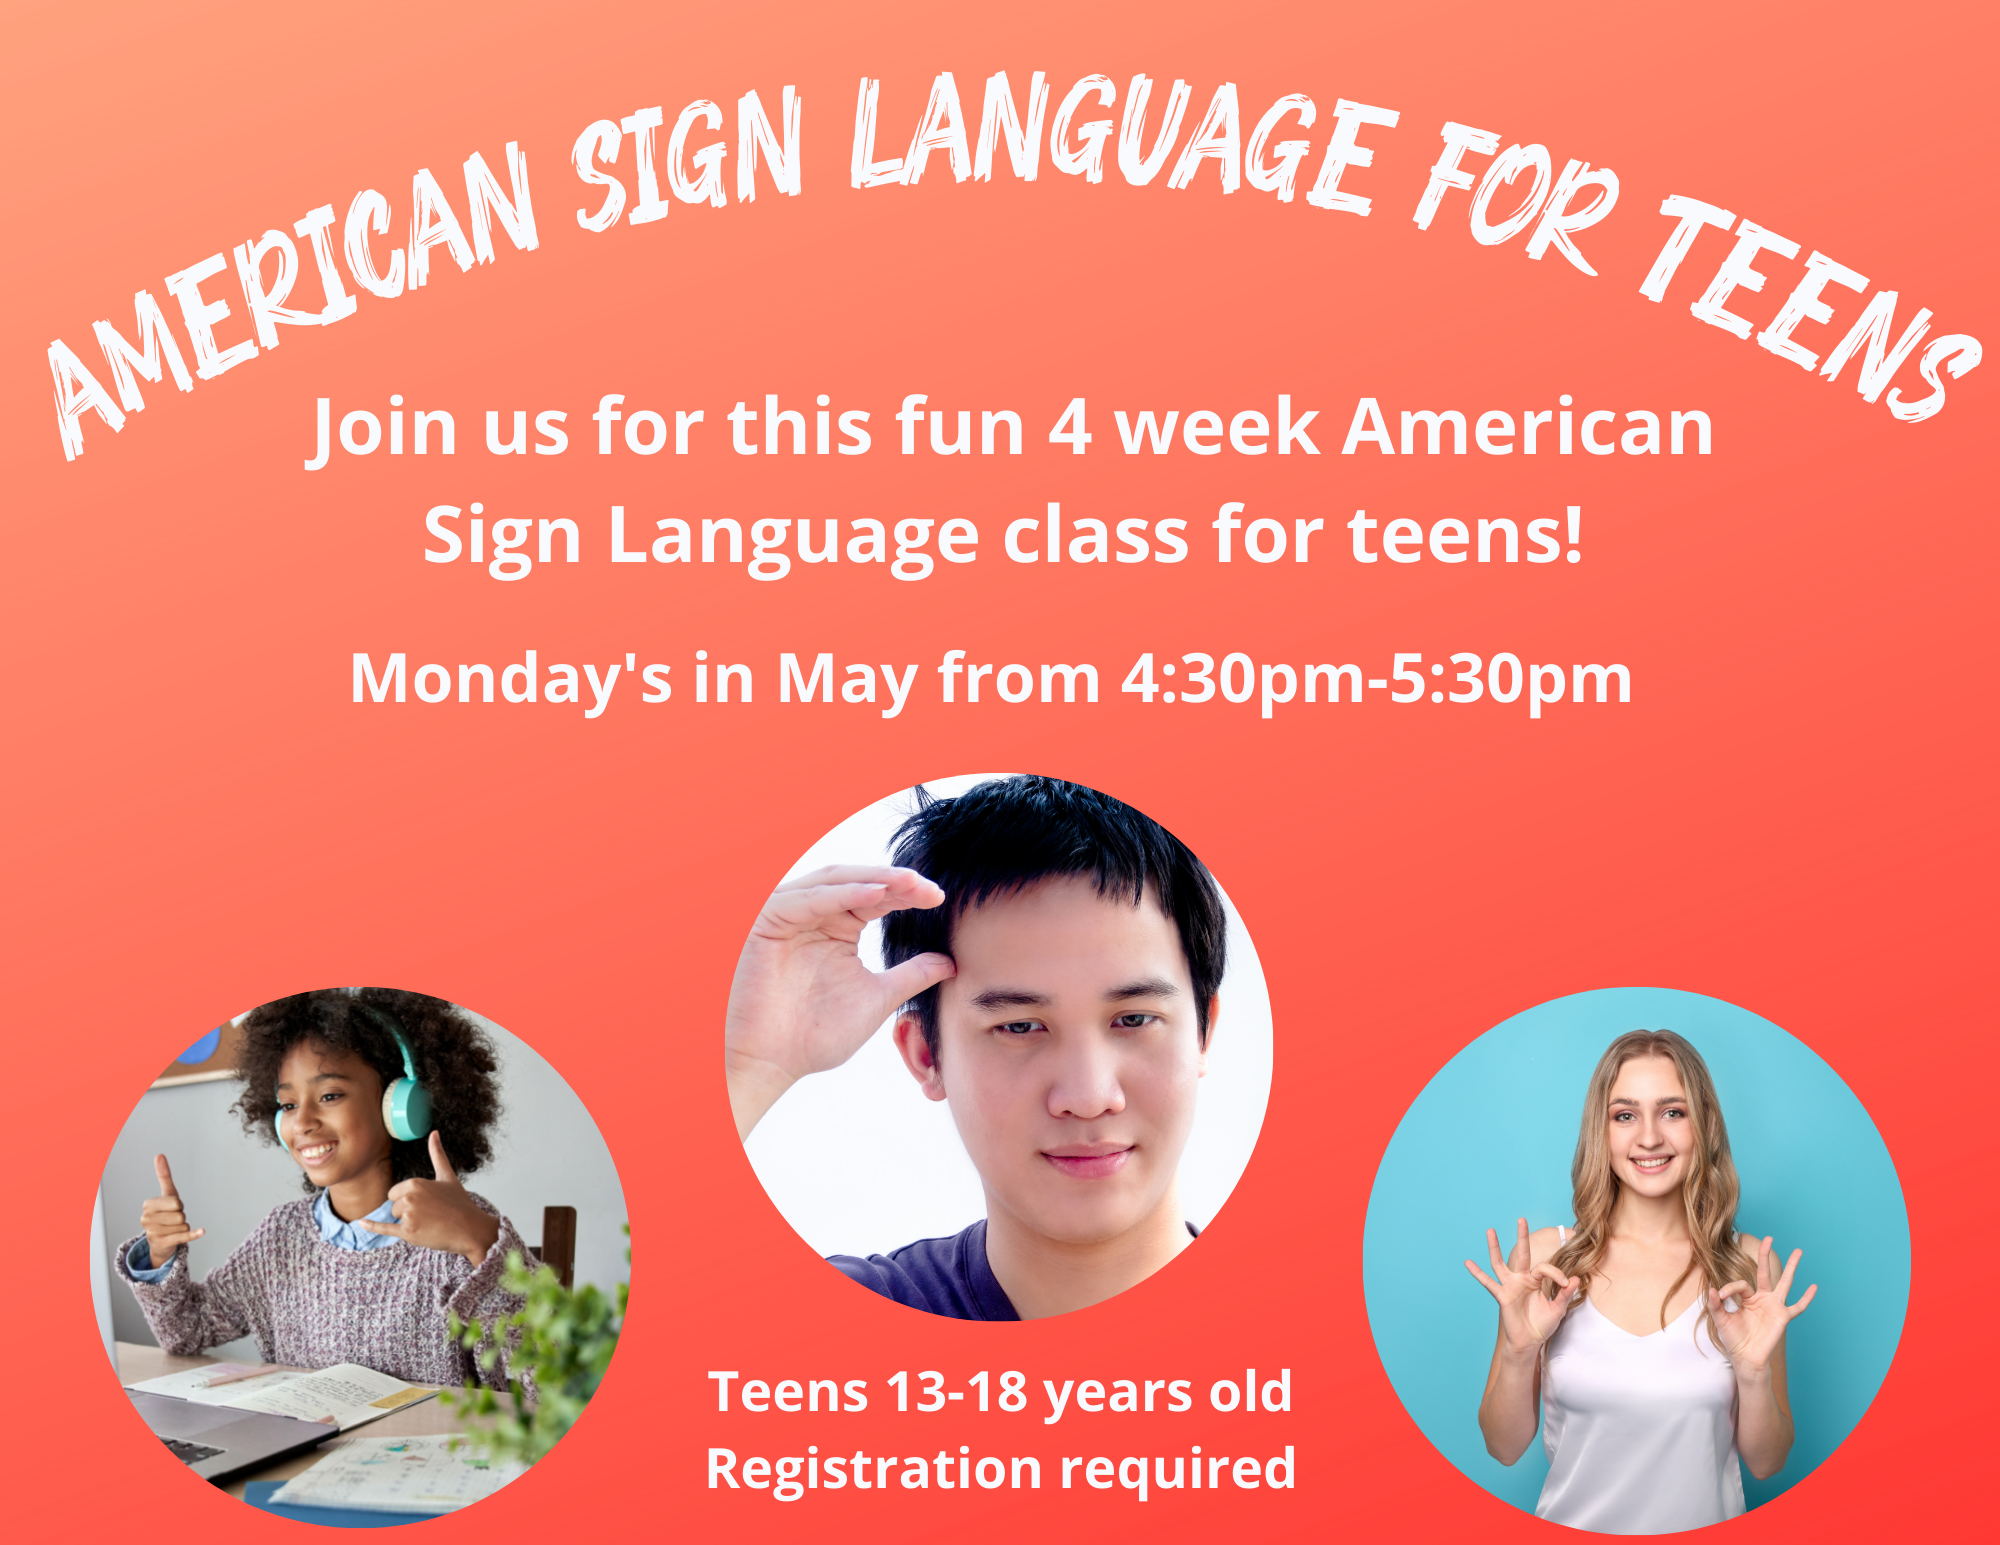 Light Orange background with white lettering that says "American Sign Language for Teens" Pictures of teens. 